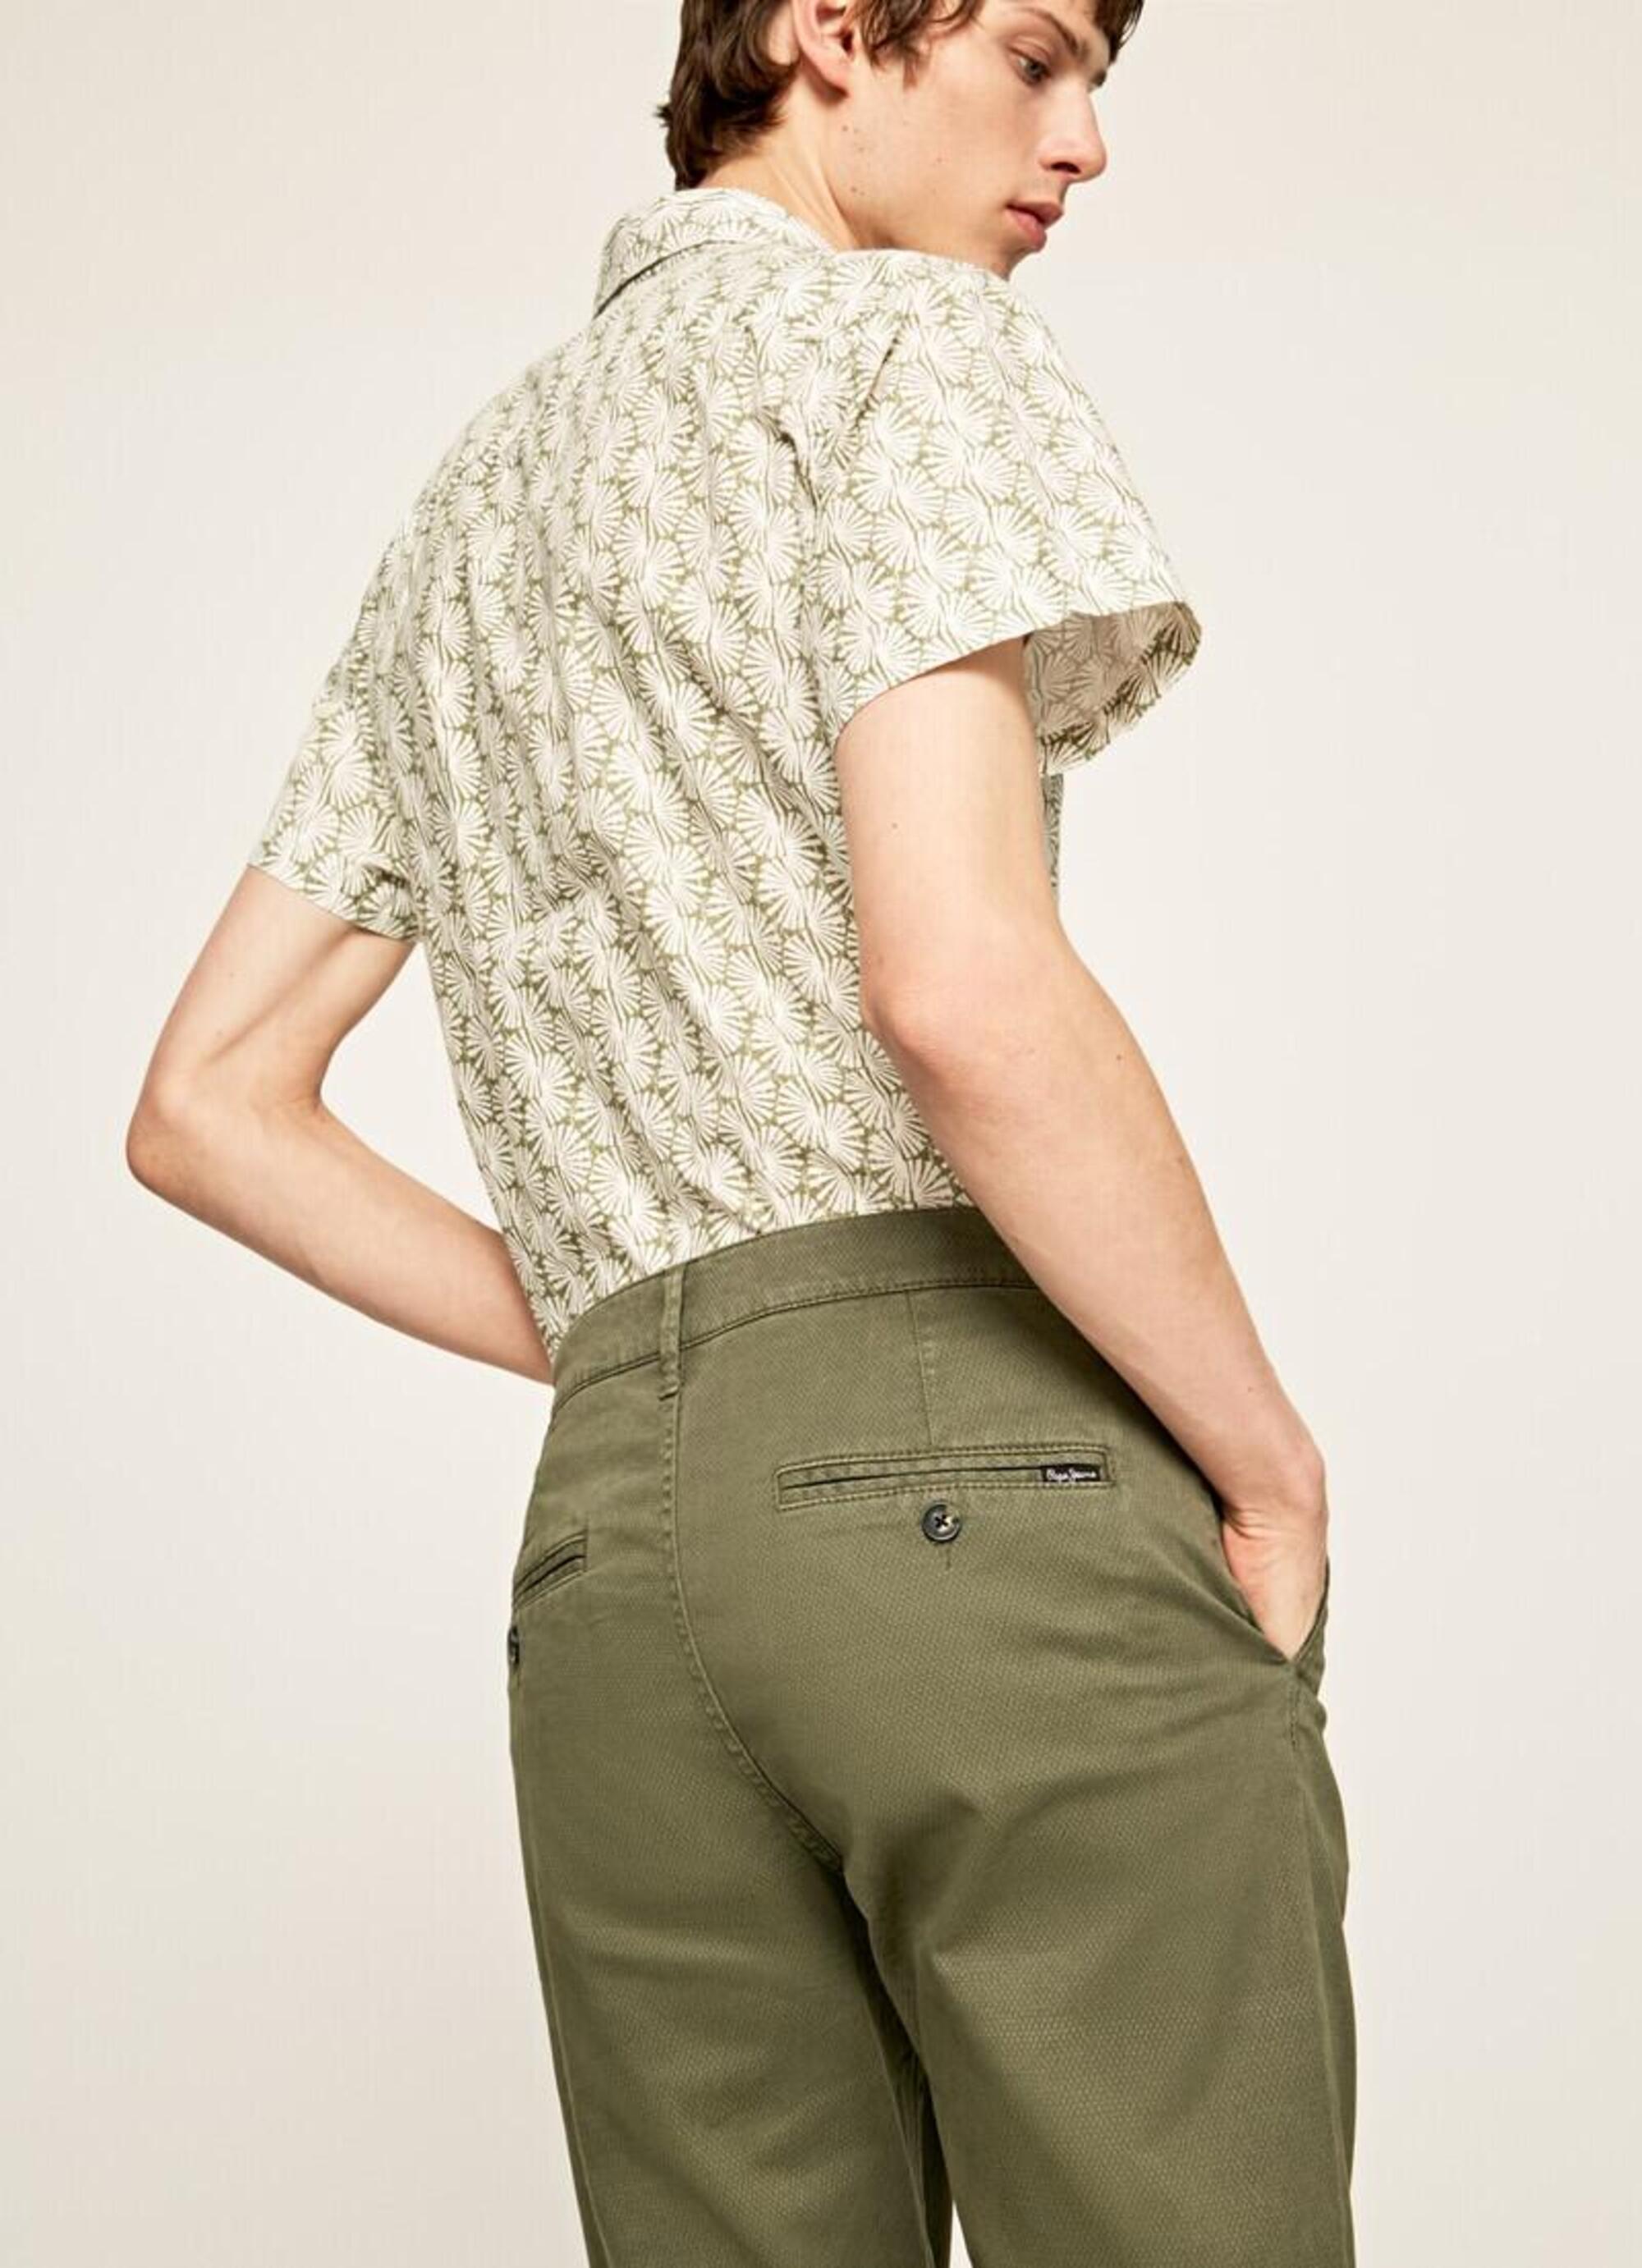 MOWMAG Pepe Jeans London chinos SS2020